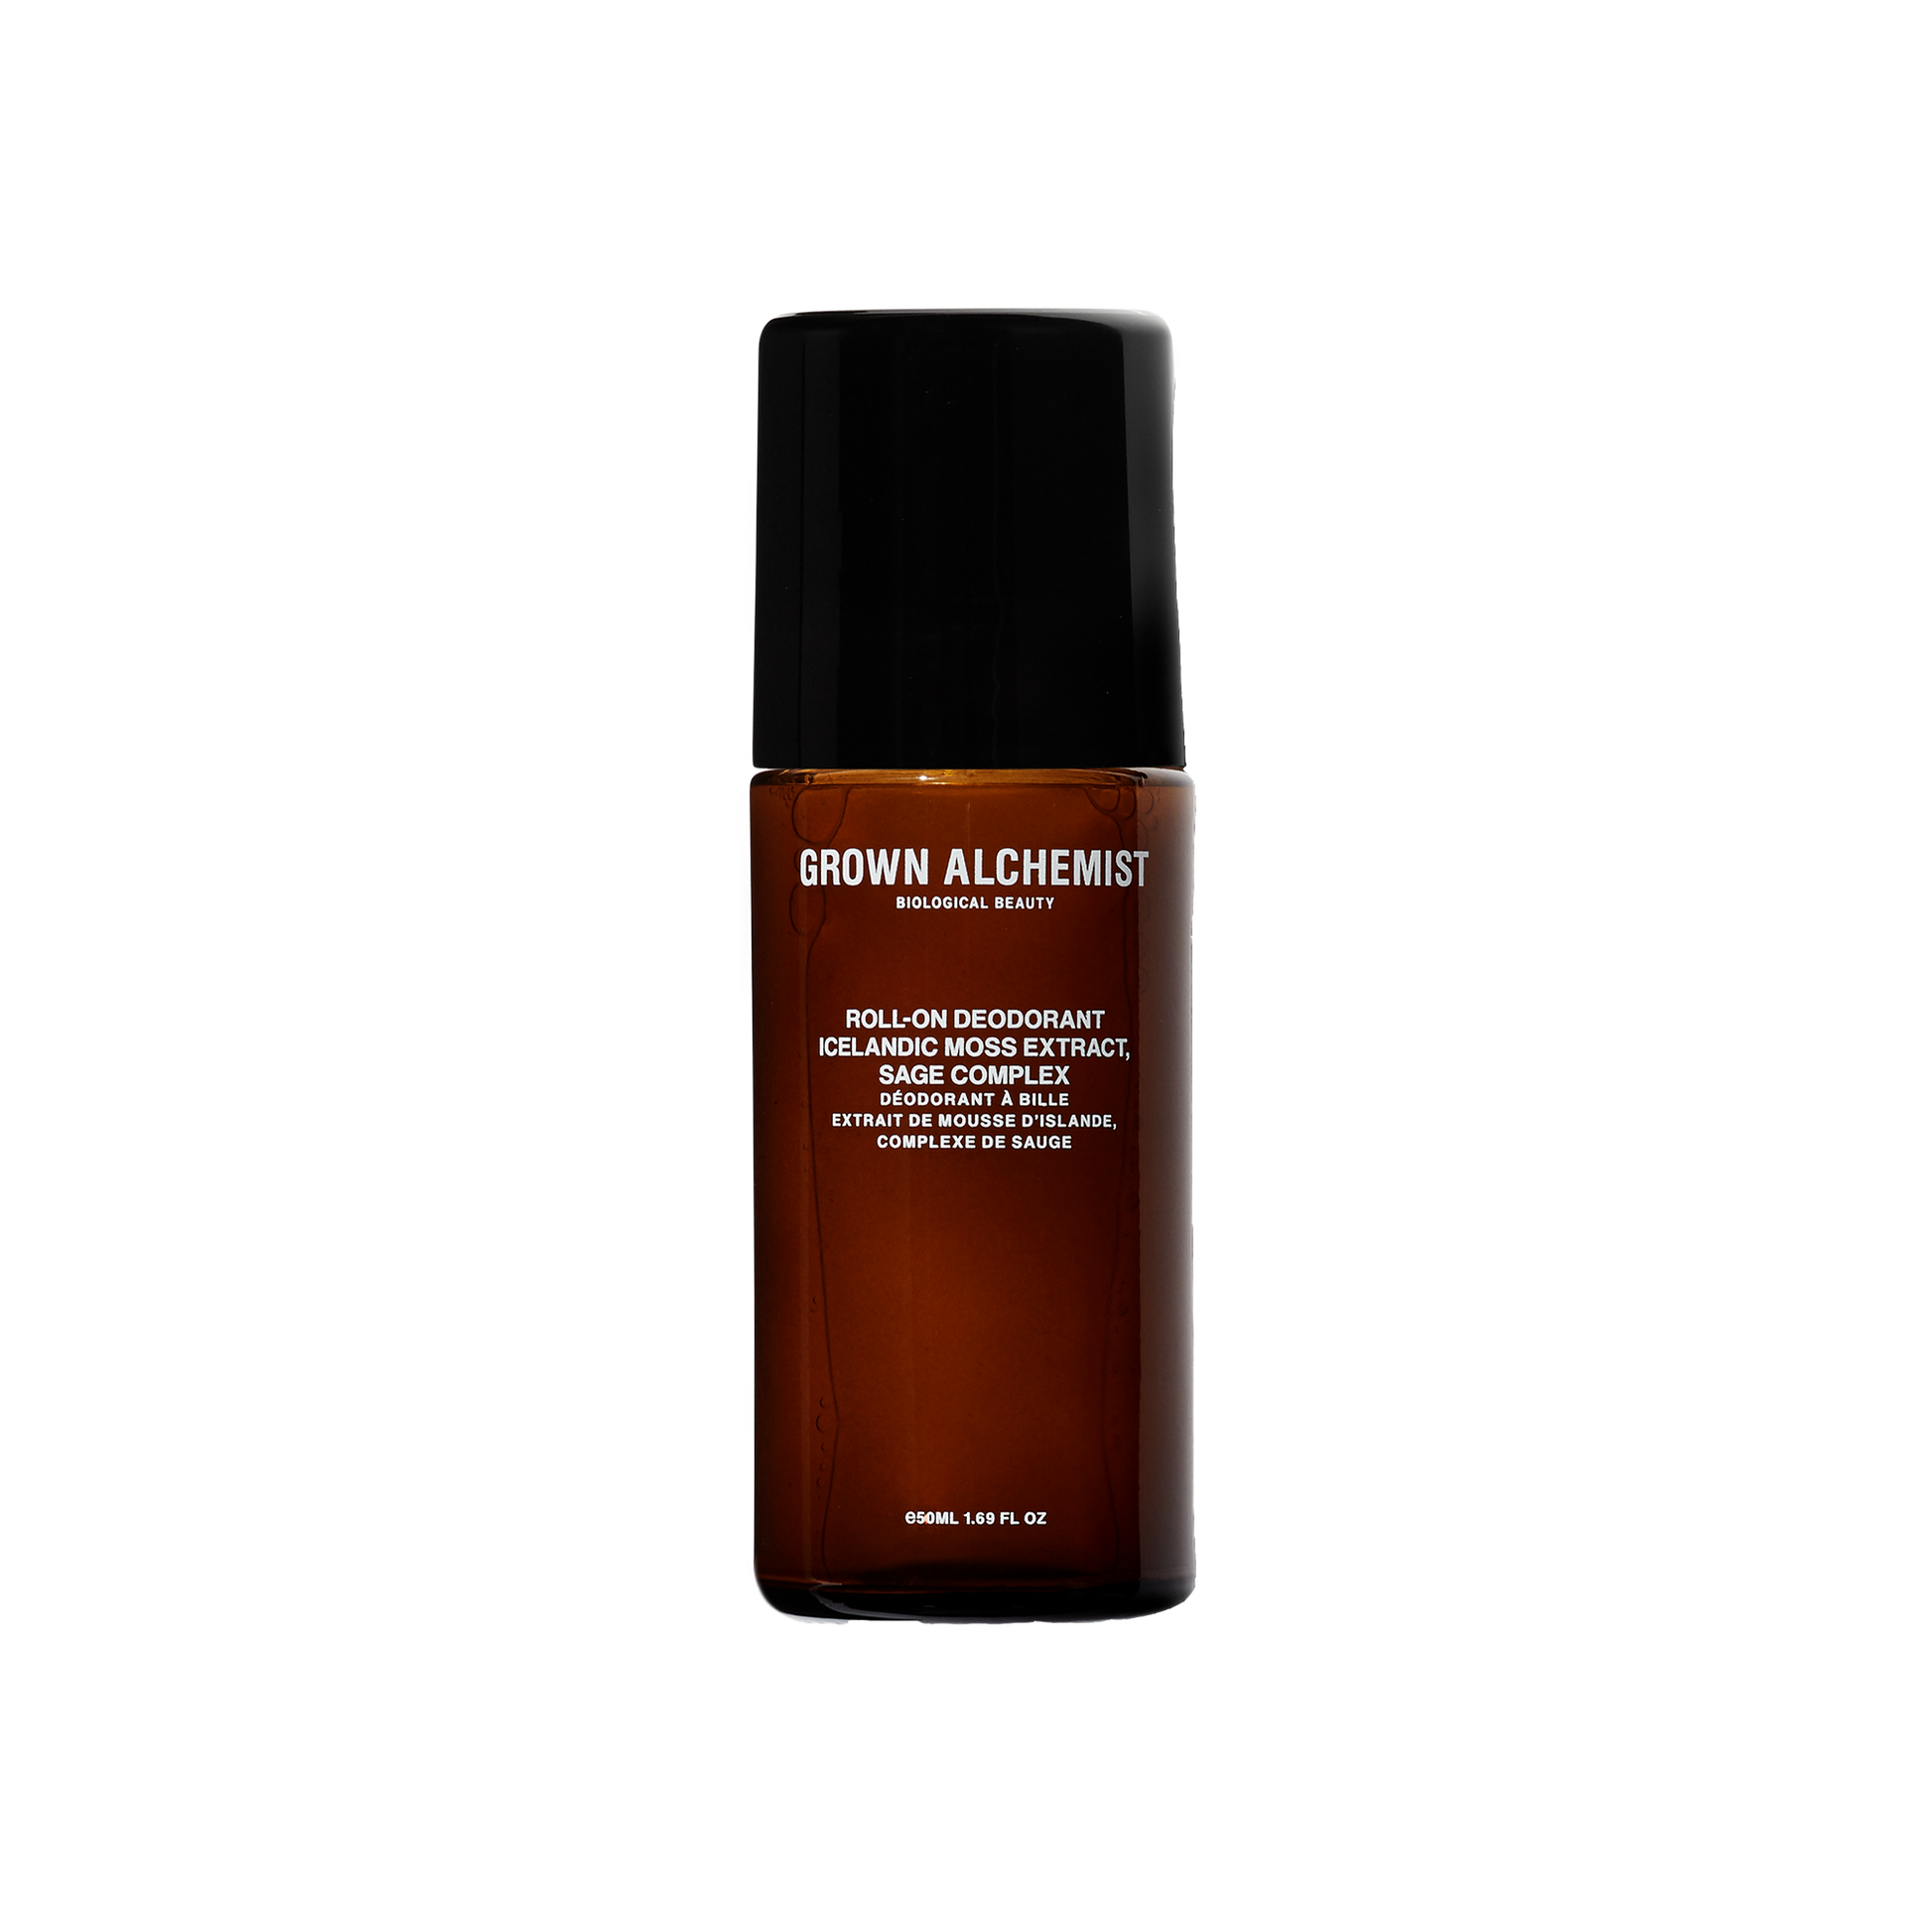 Grown Alchemist Roll On Deodorant: An aluminum-free formulation containing advanced natural anti-bacterial actives that eliminate undesirable odor ensuring optimum microbial balance.